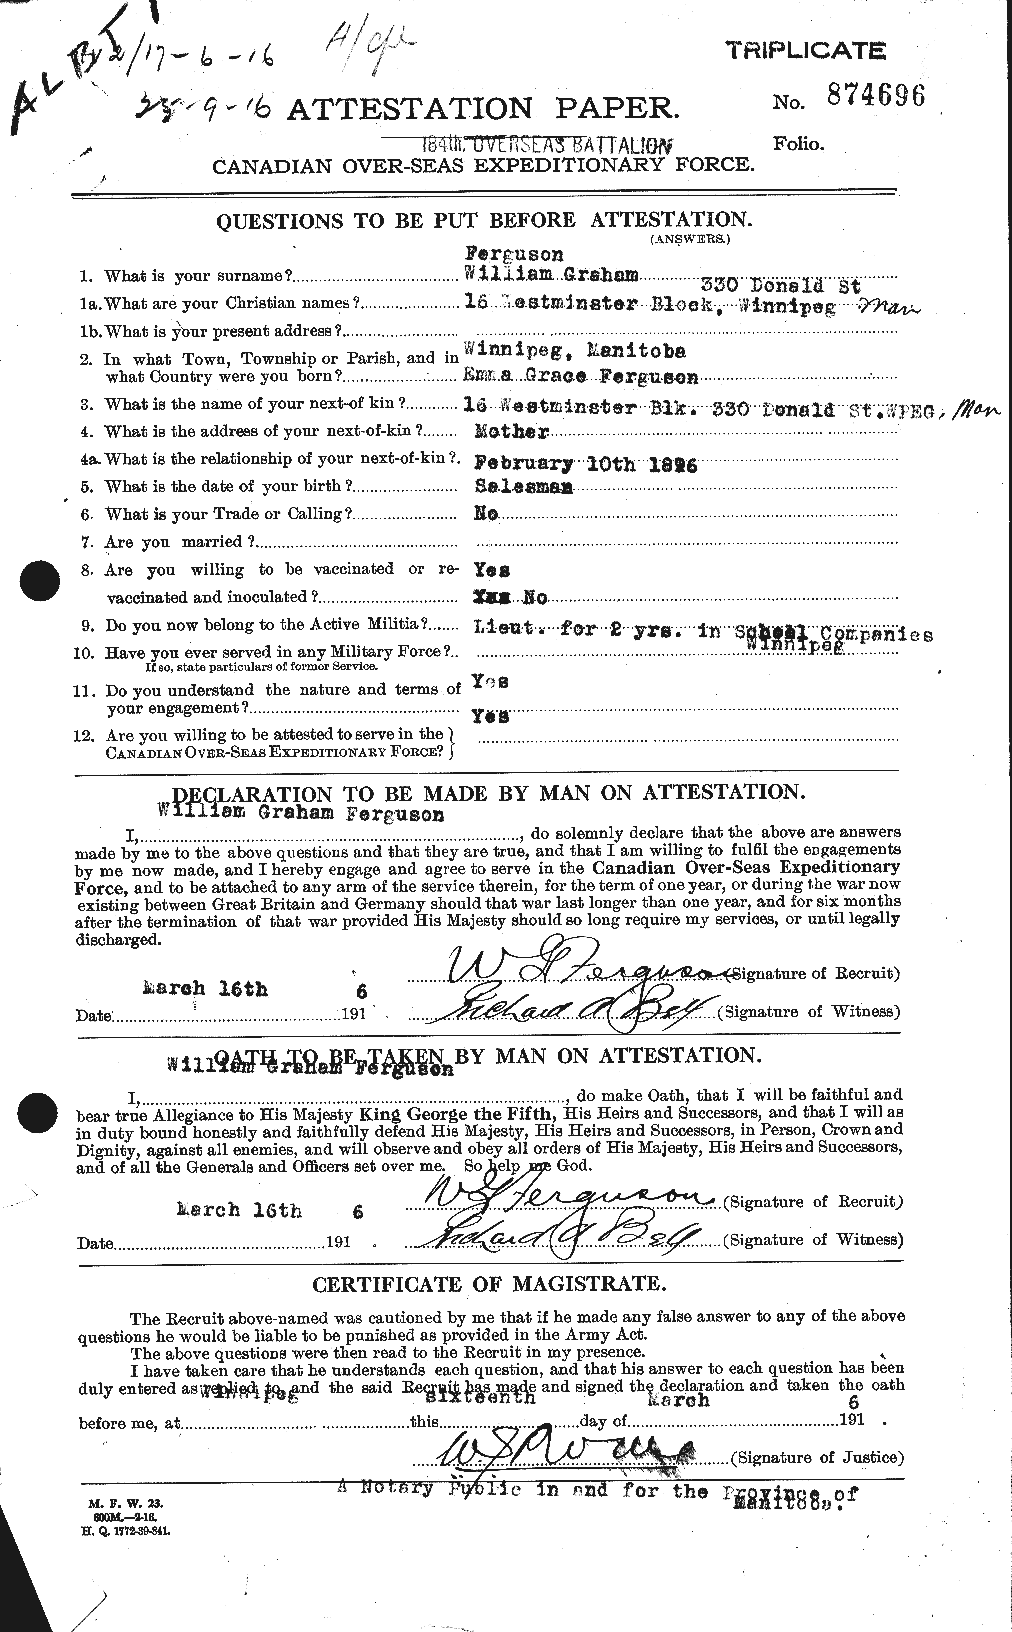 Personnel Records of the First World War - CEF 322103a